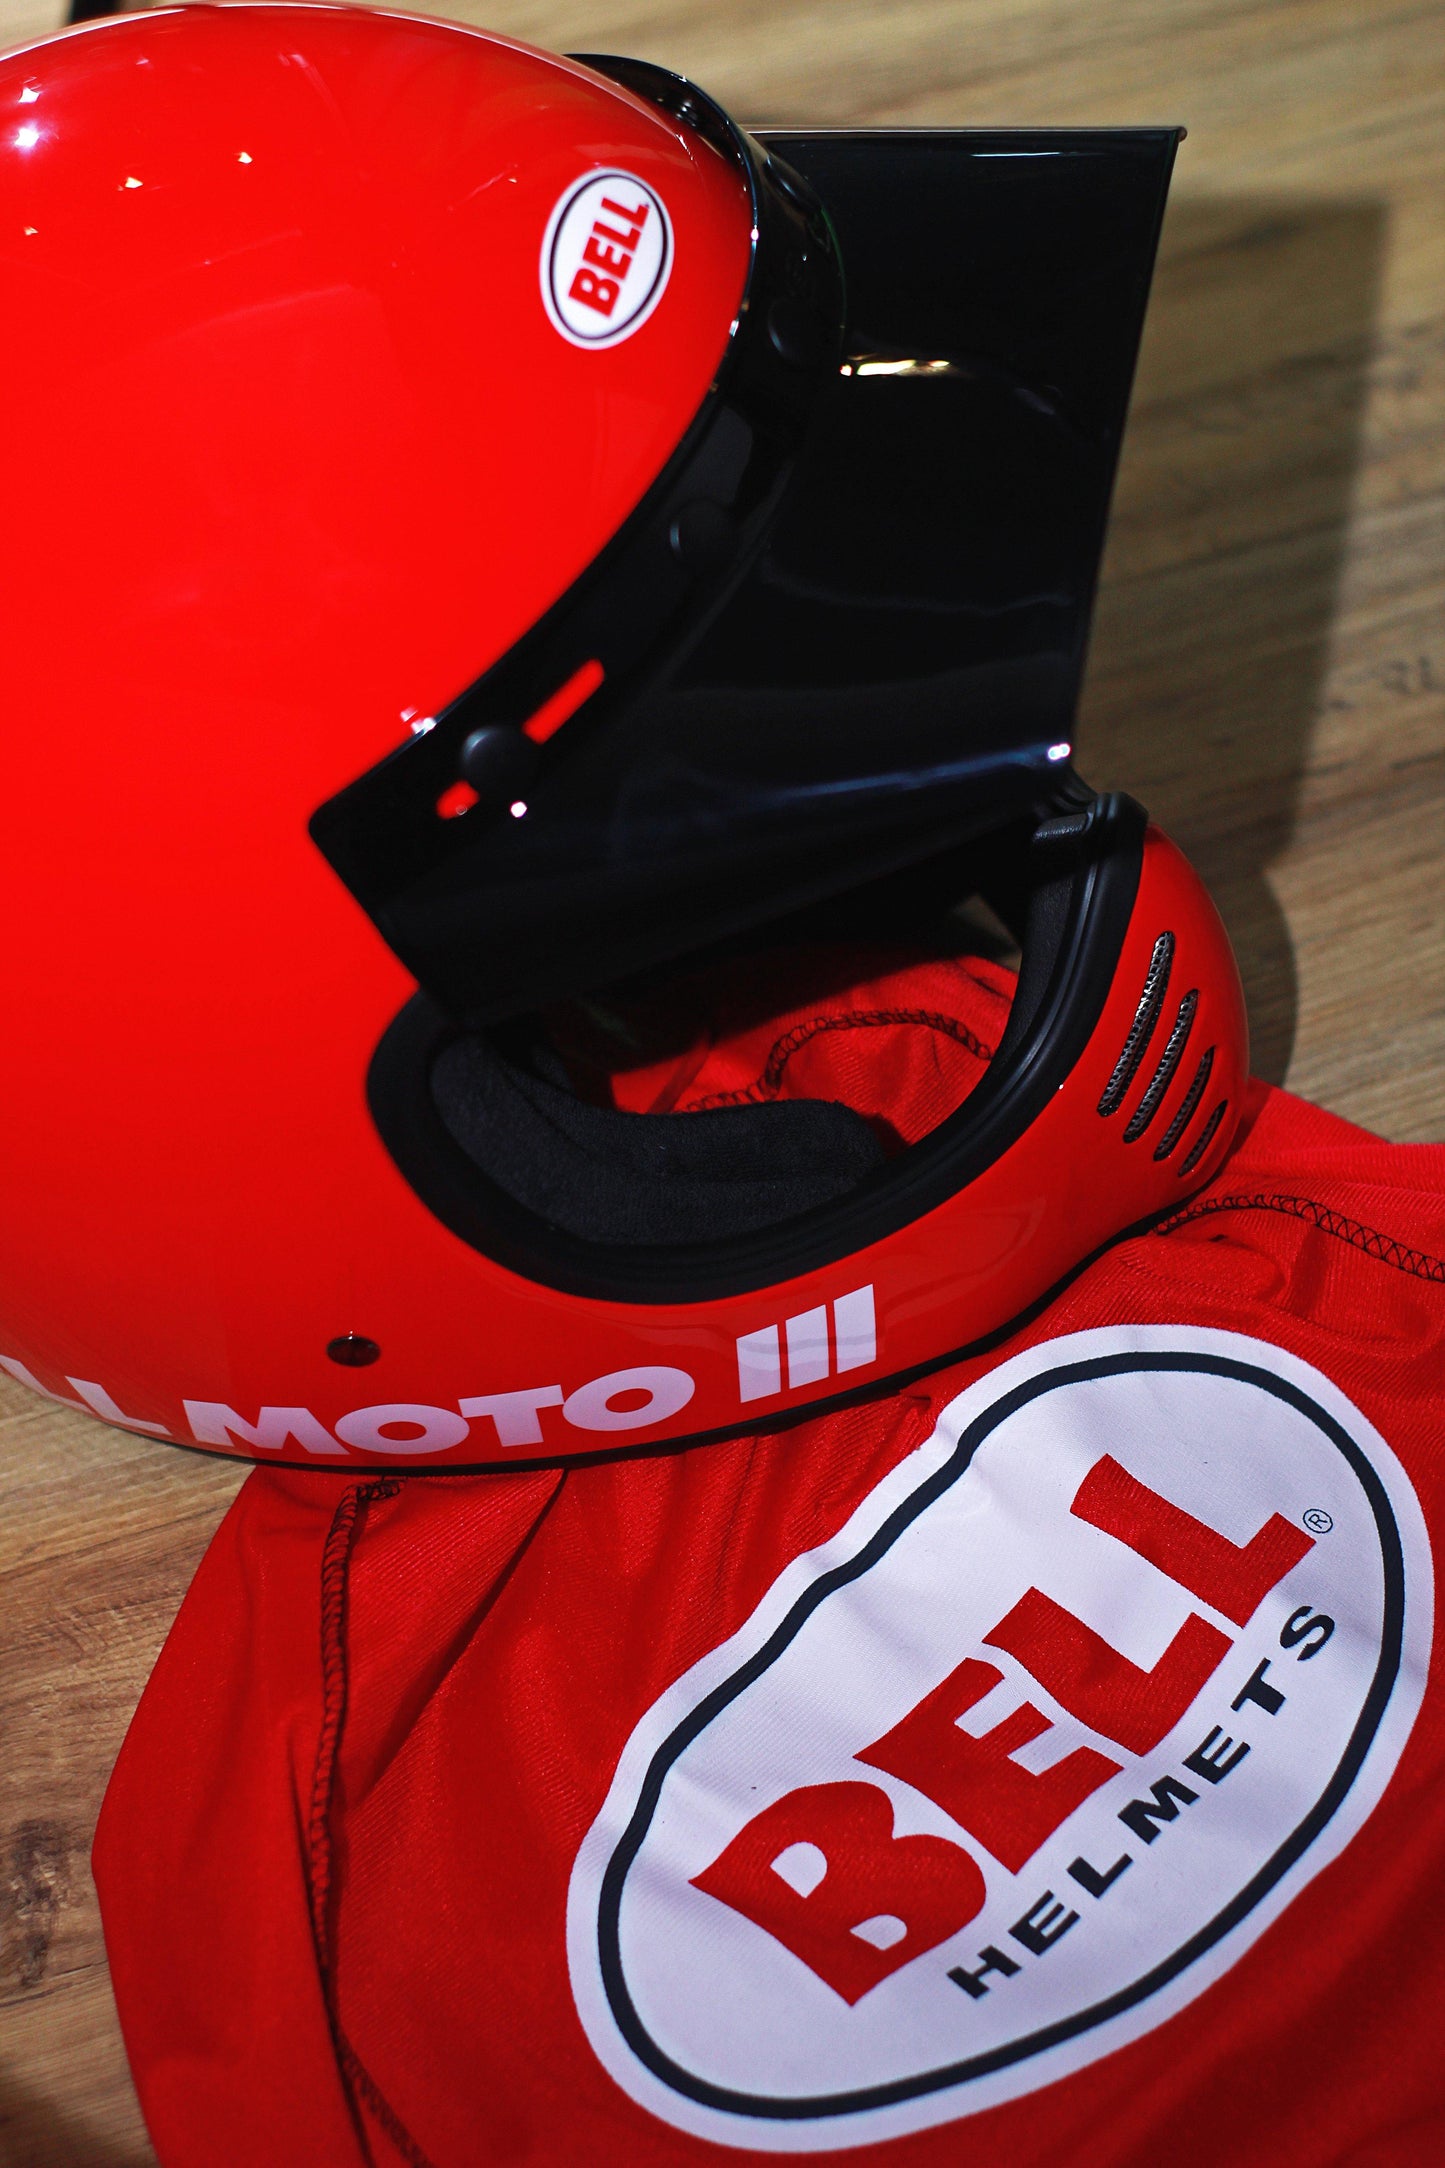 Bell Moto-3 (Classic Red) - Durian Bikers